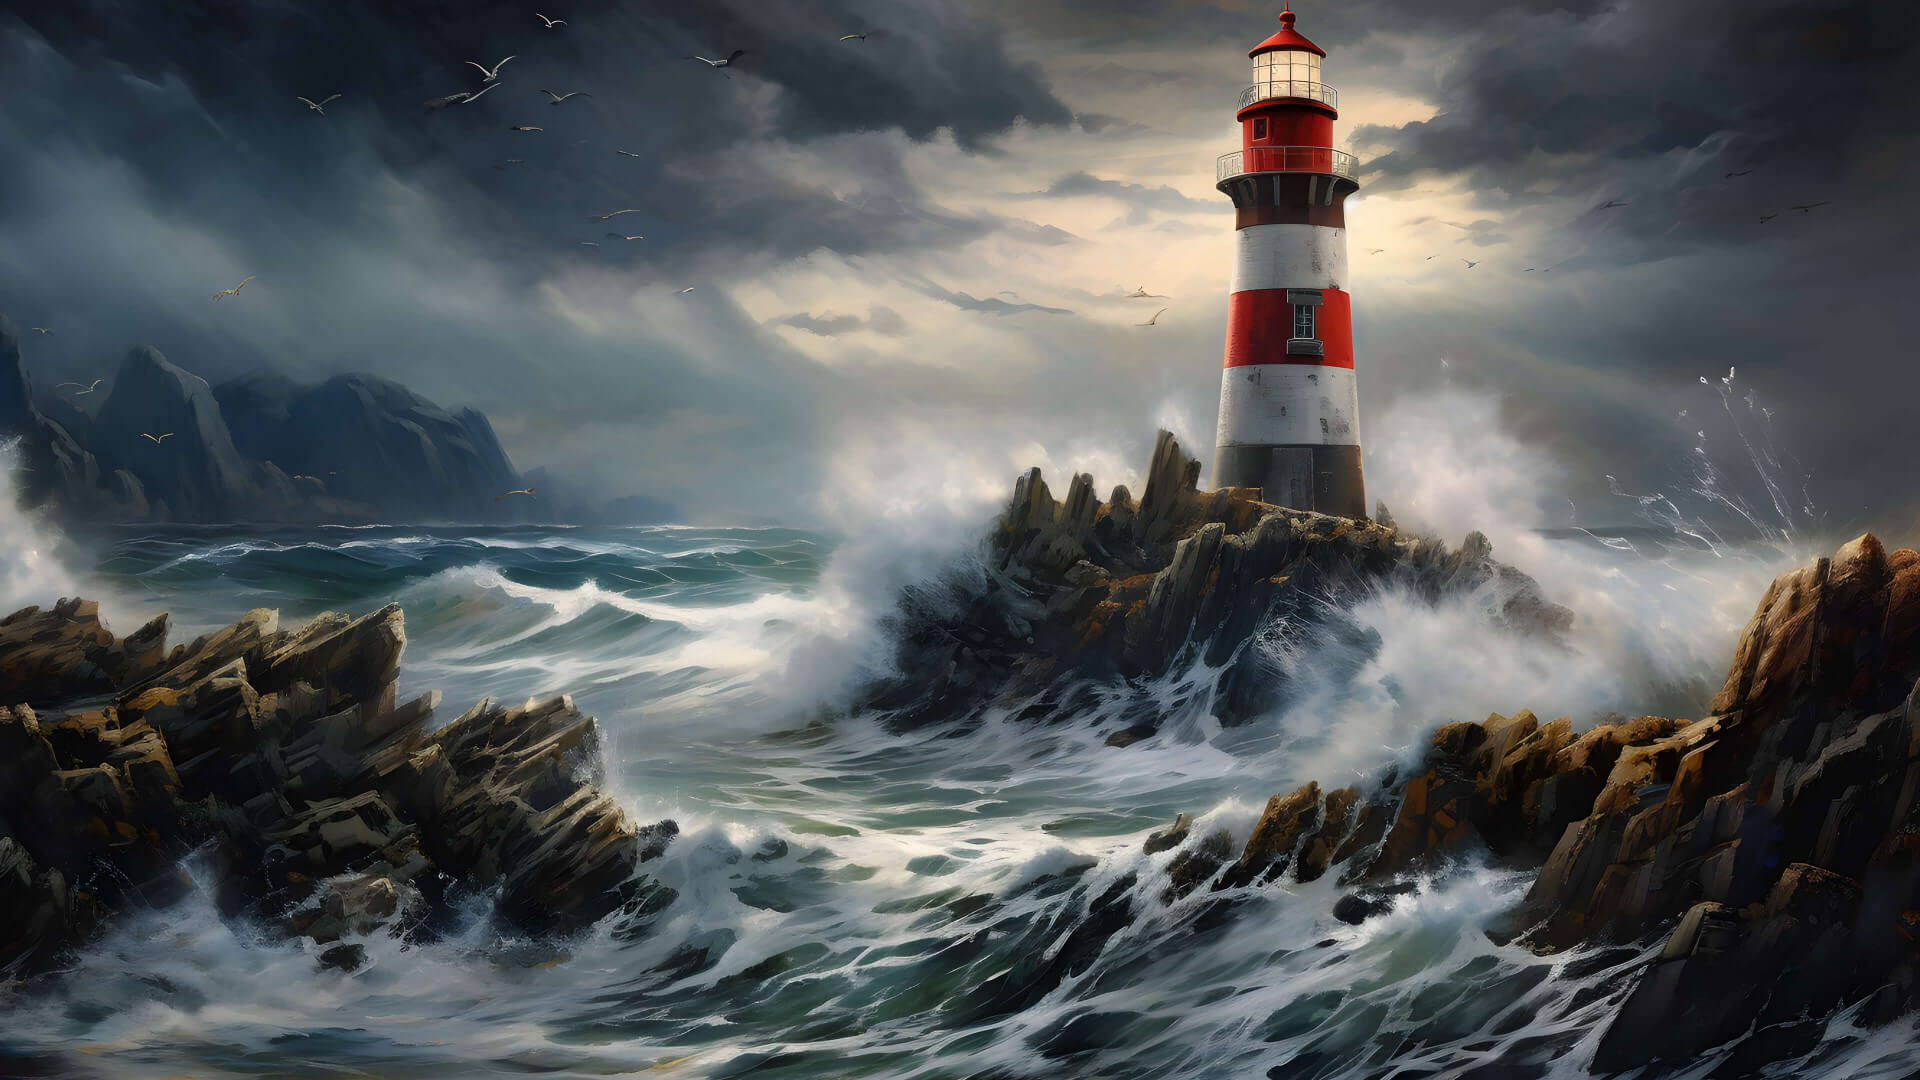 Lighthouse in the ocean waves wallpaper 1366x768